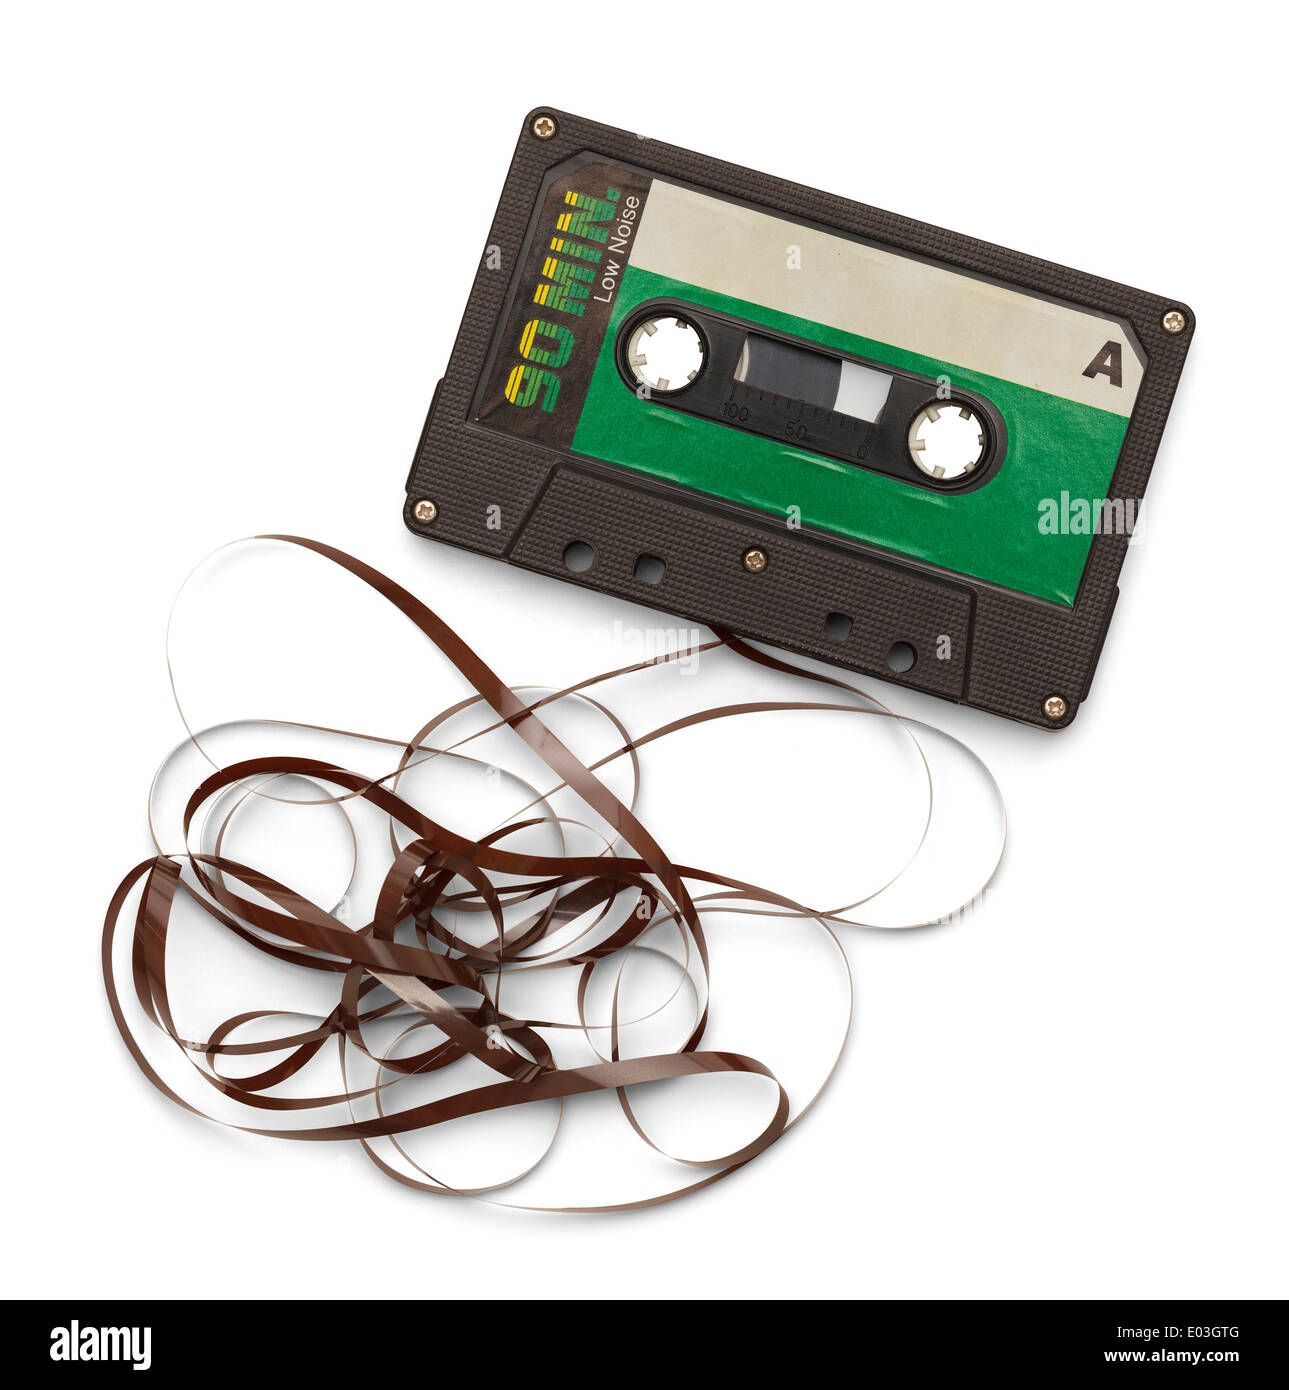 Reel to reel cassette tape Cut Out Stock Images & Pictures - Alamy